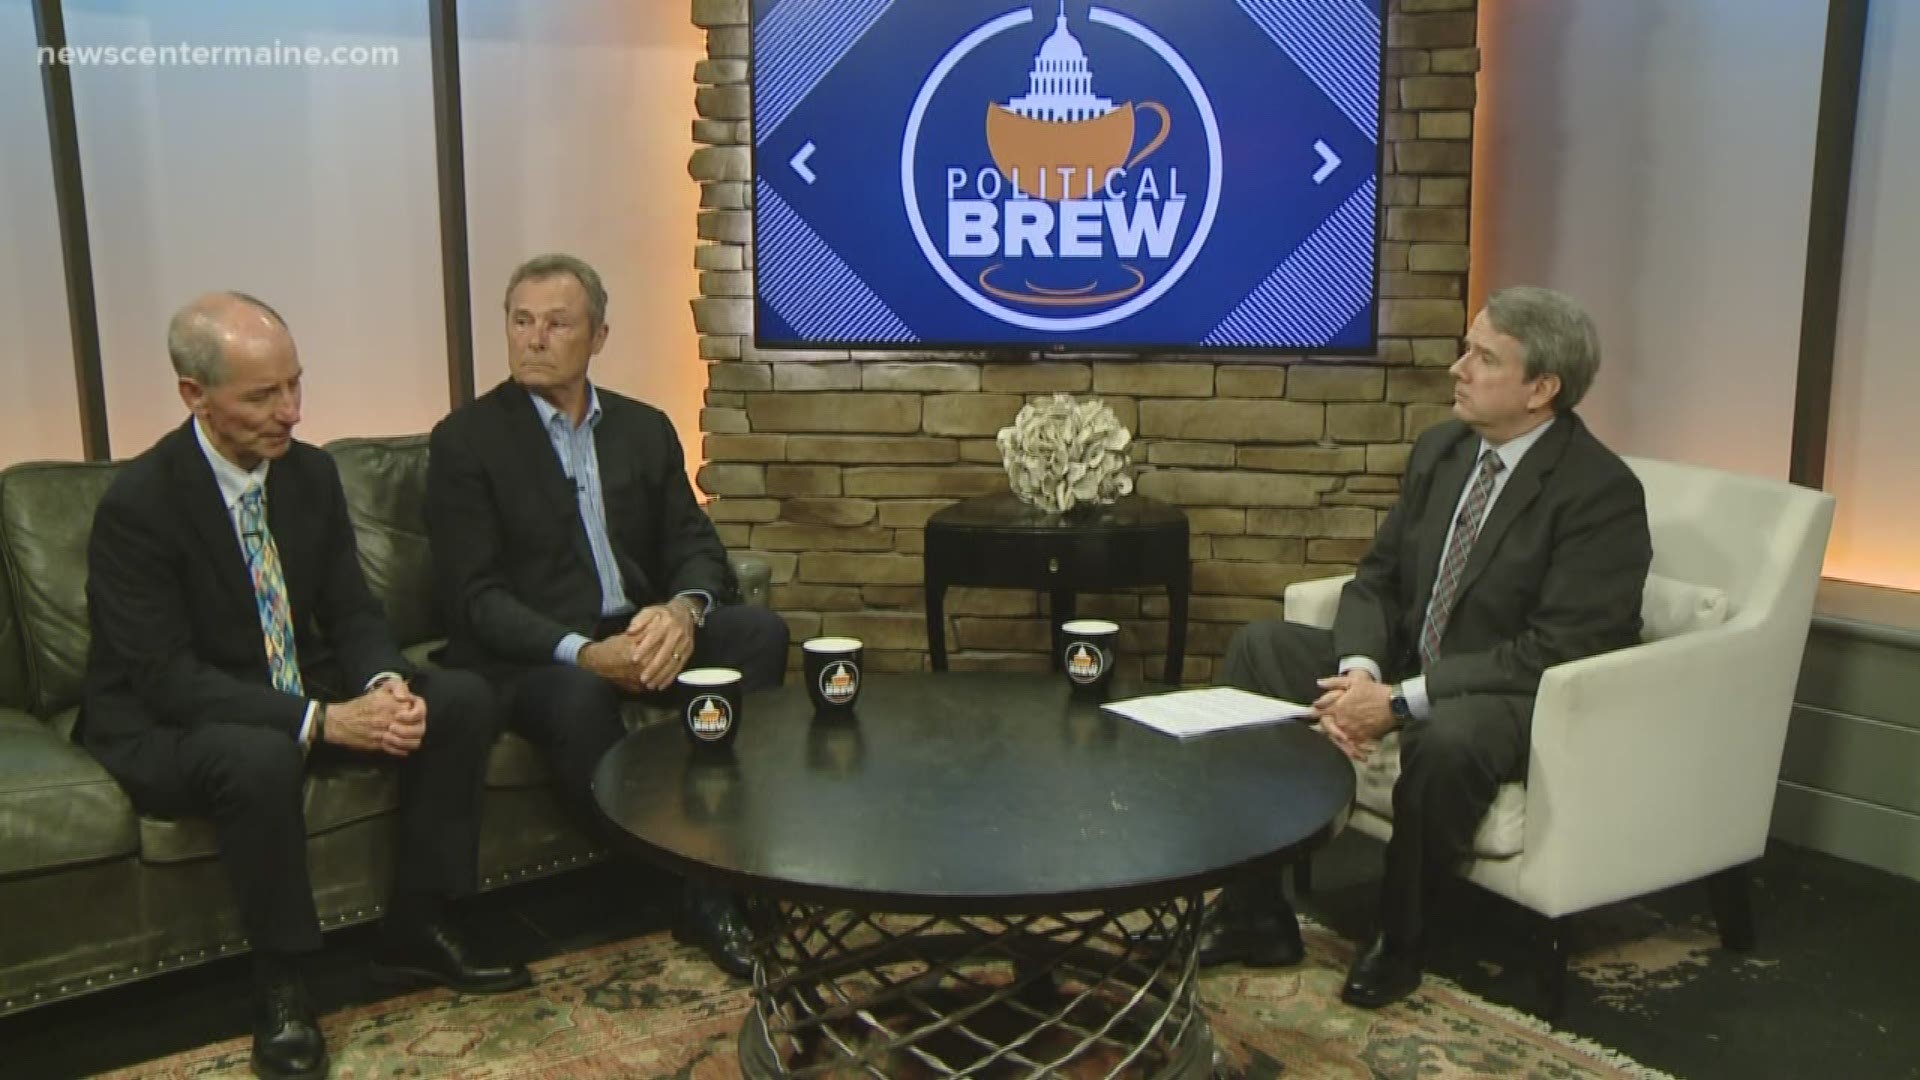 Former Republican Sen. Phil Harriman is joined this week by a one-time State House colleague, former Democratic Sen. Jerry Conley, Jr., who is subbing for John Richardson this week on NEWS CENTER Maine's Political Brew